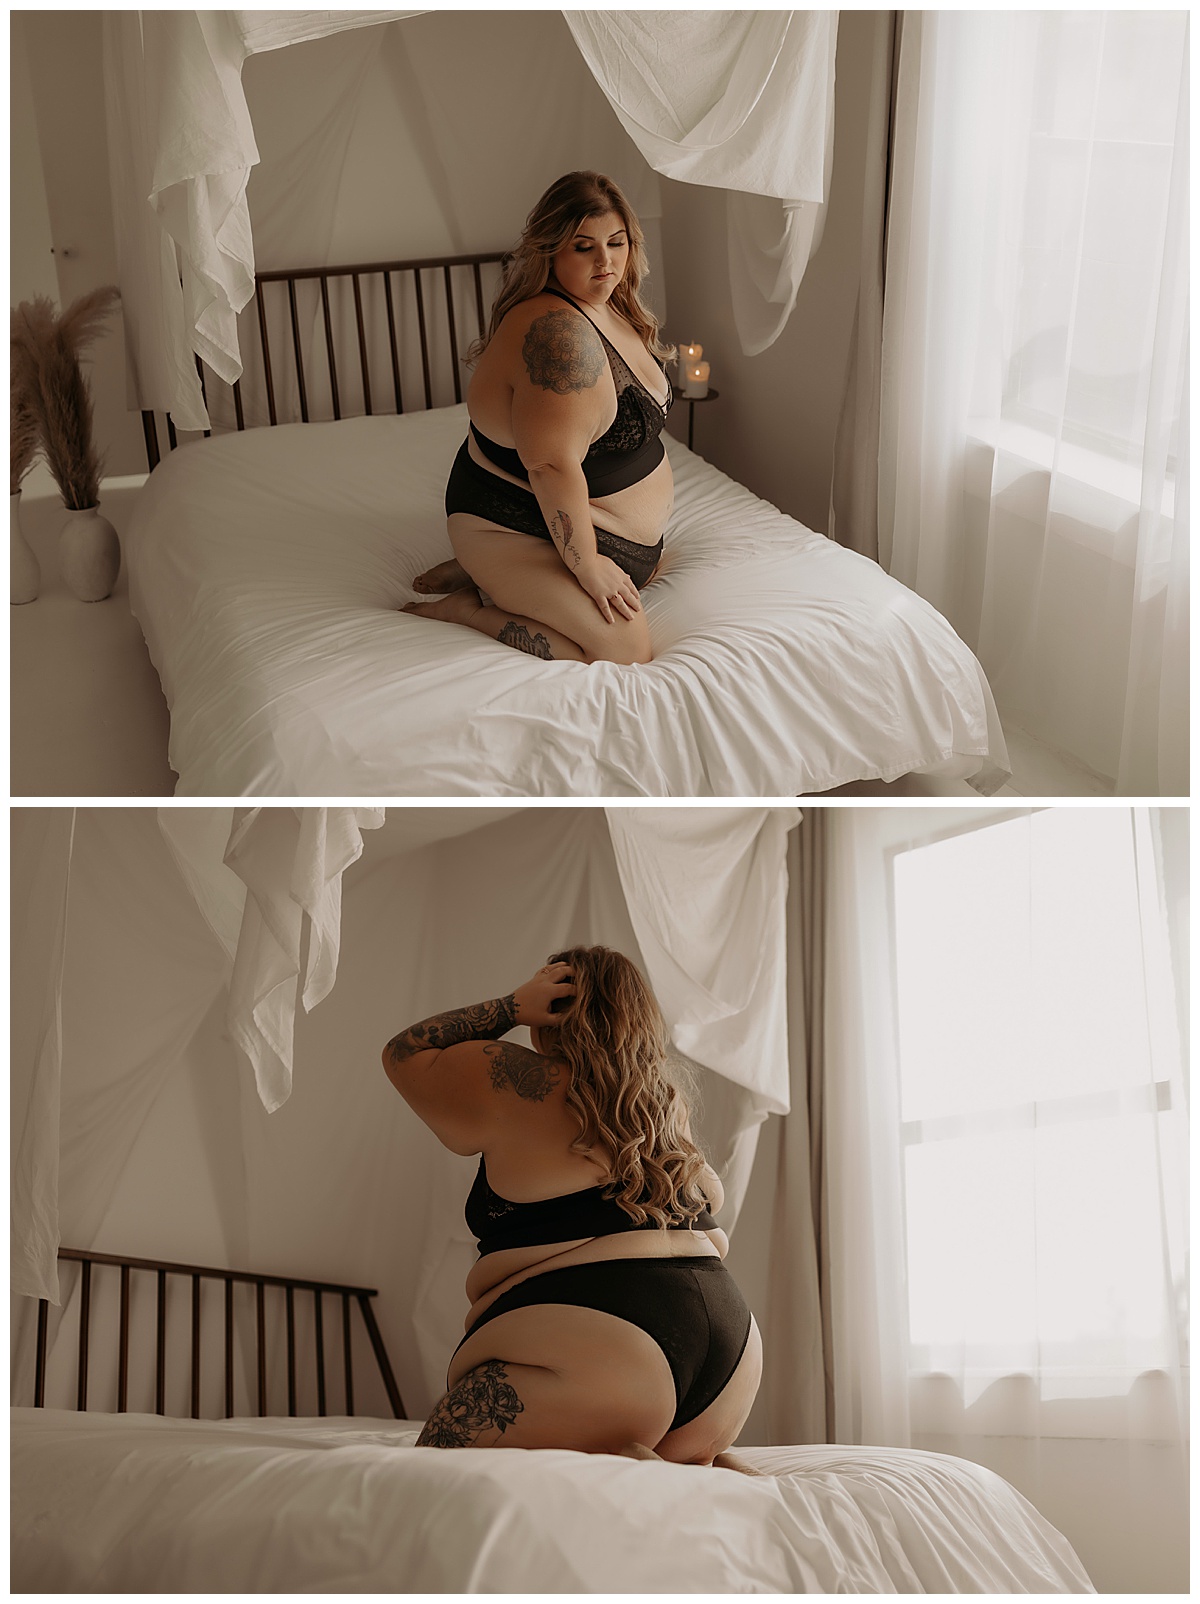 Woman wears black outfit fromTorrid Lingerie while kneeling on the bed